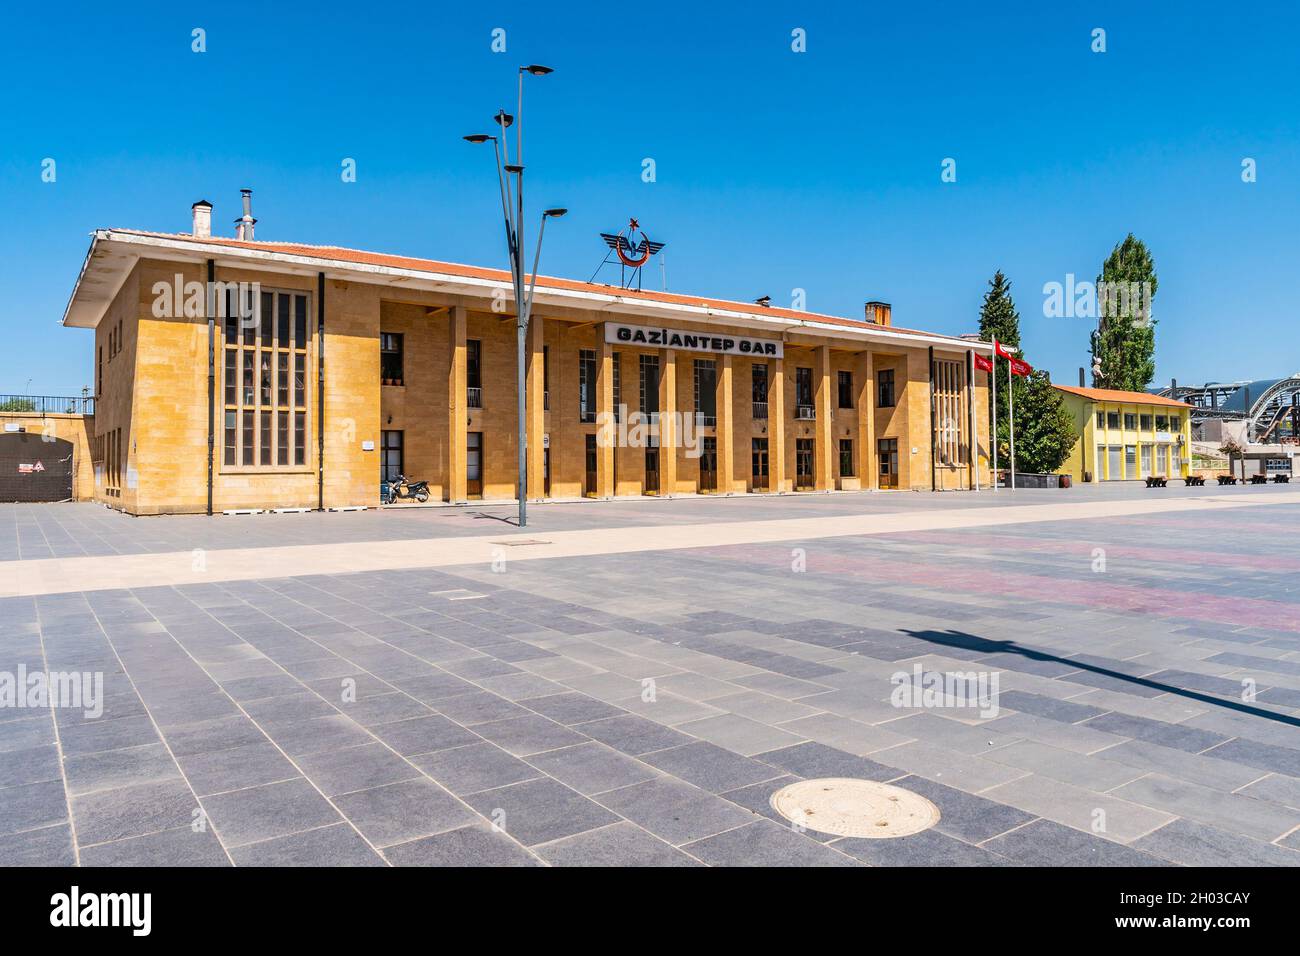 Gaziantep Railway Station Breathtaking Picturesque Frontal View on a Blue Sky Day in Summer Stock Photo